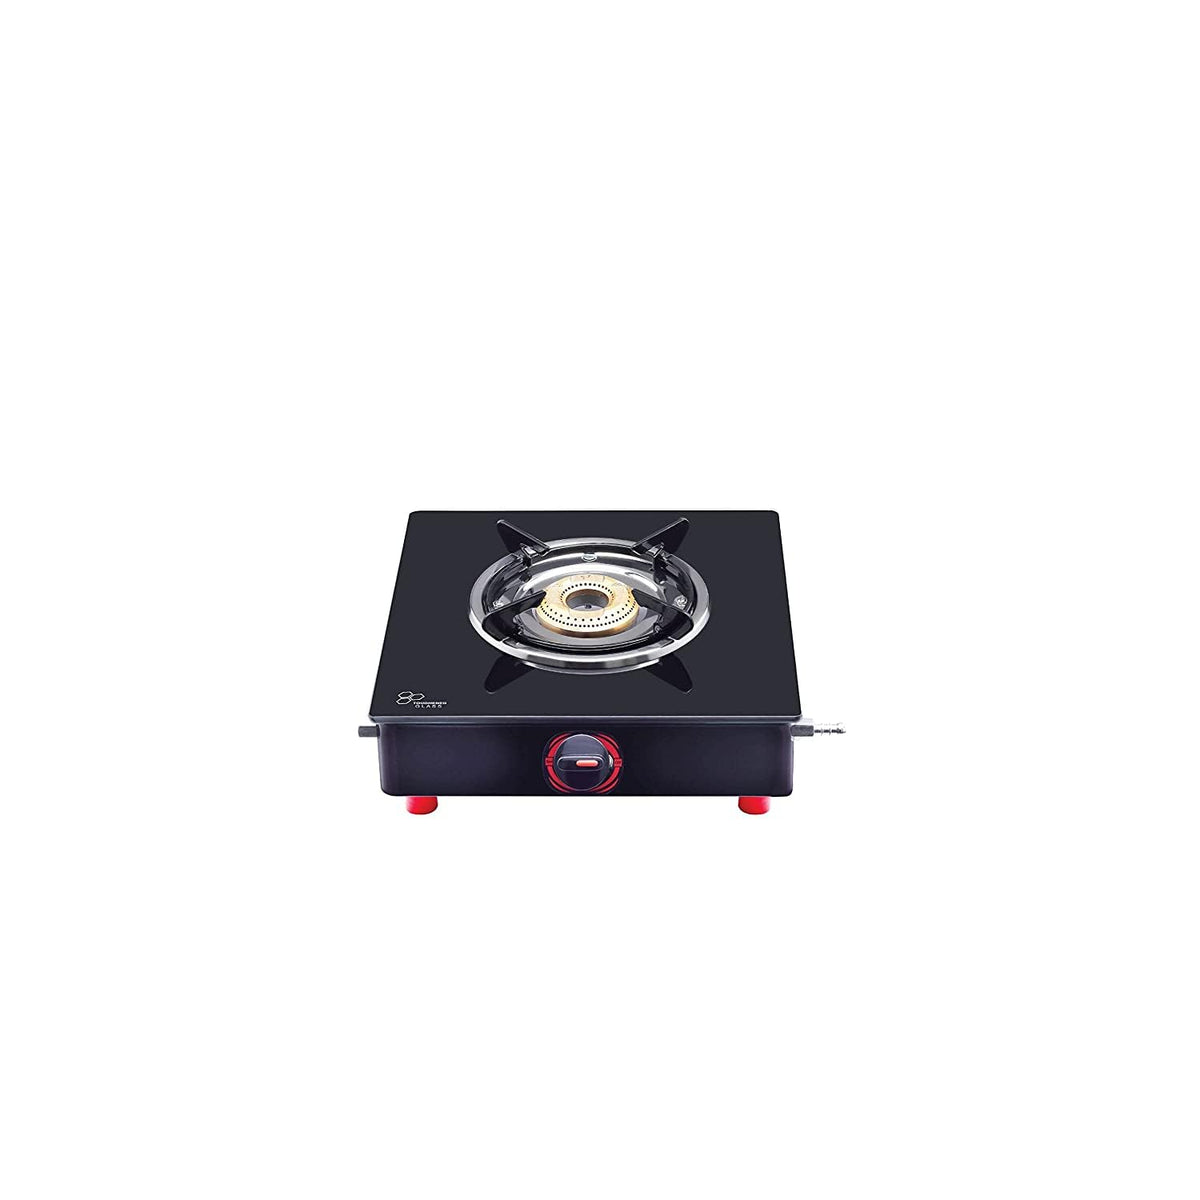 Surya Flame Smart Gas Stove 1 Barss Burner Glass Top chulha Black Manual Ignition LPG Stove With ISI Certified Rust Free Body - 2 Years Complete Doorstep Warranty Including Glass